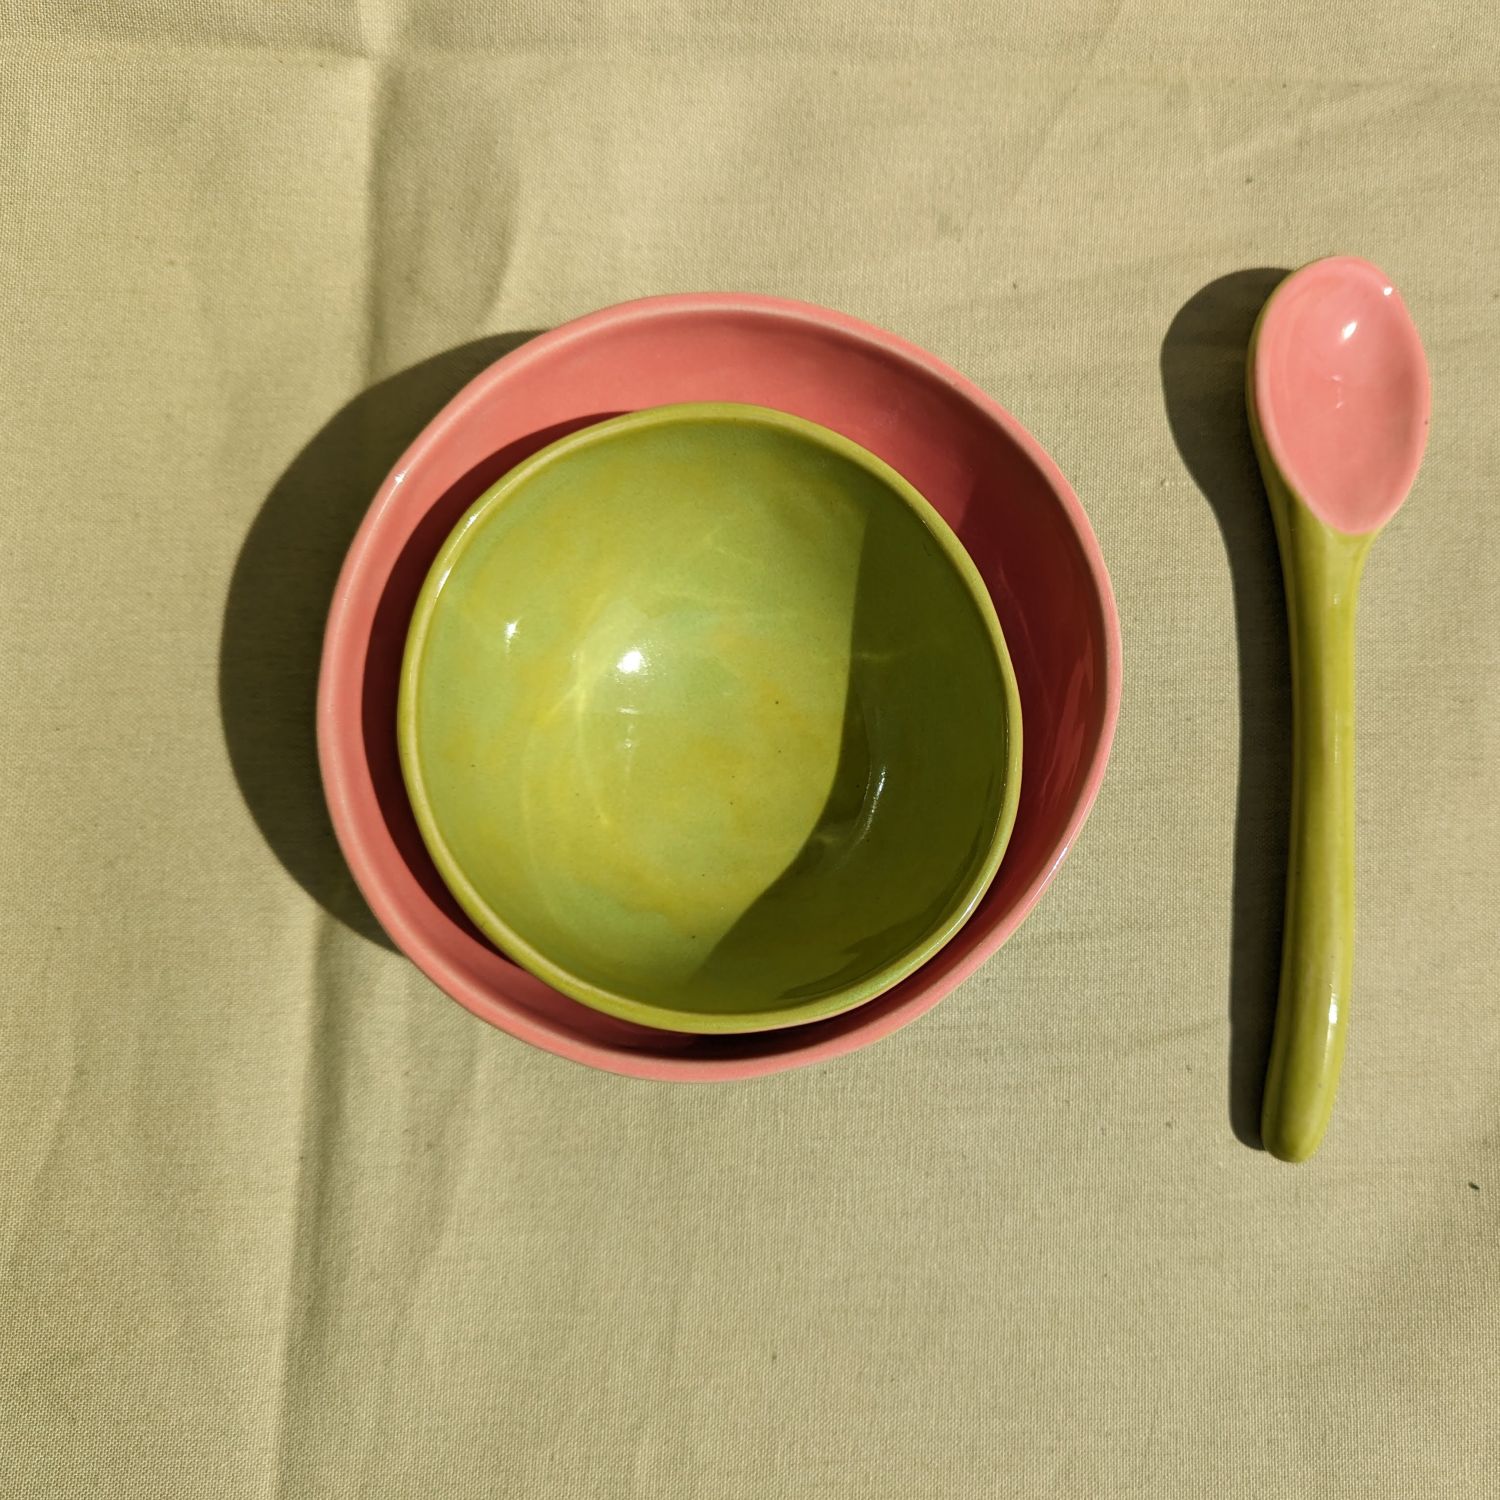 Wendy Nichol: Small Ice Cream Bowl – Assorted Colours Product Image 4 of 5